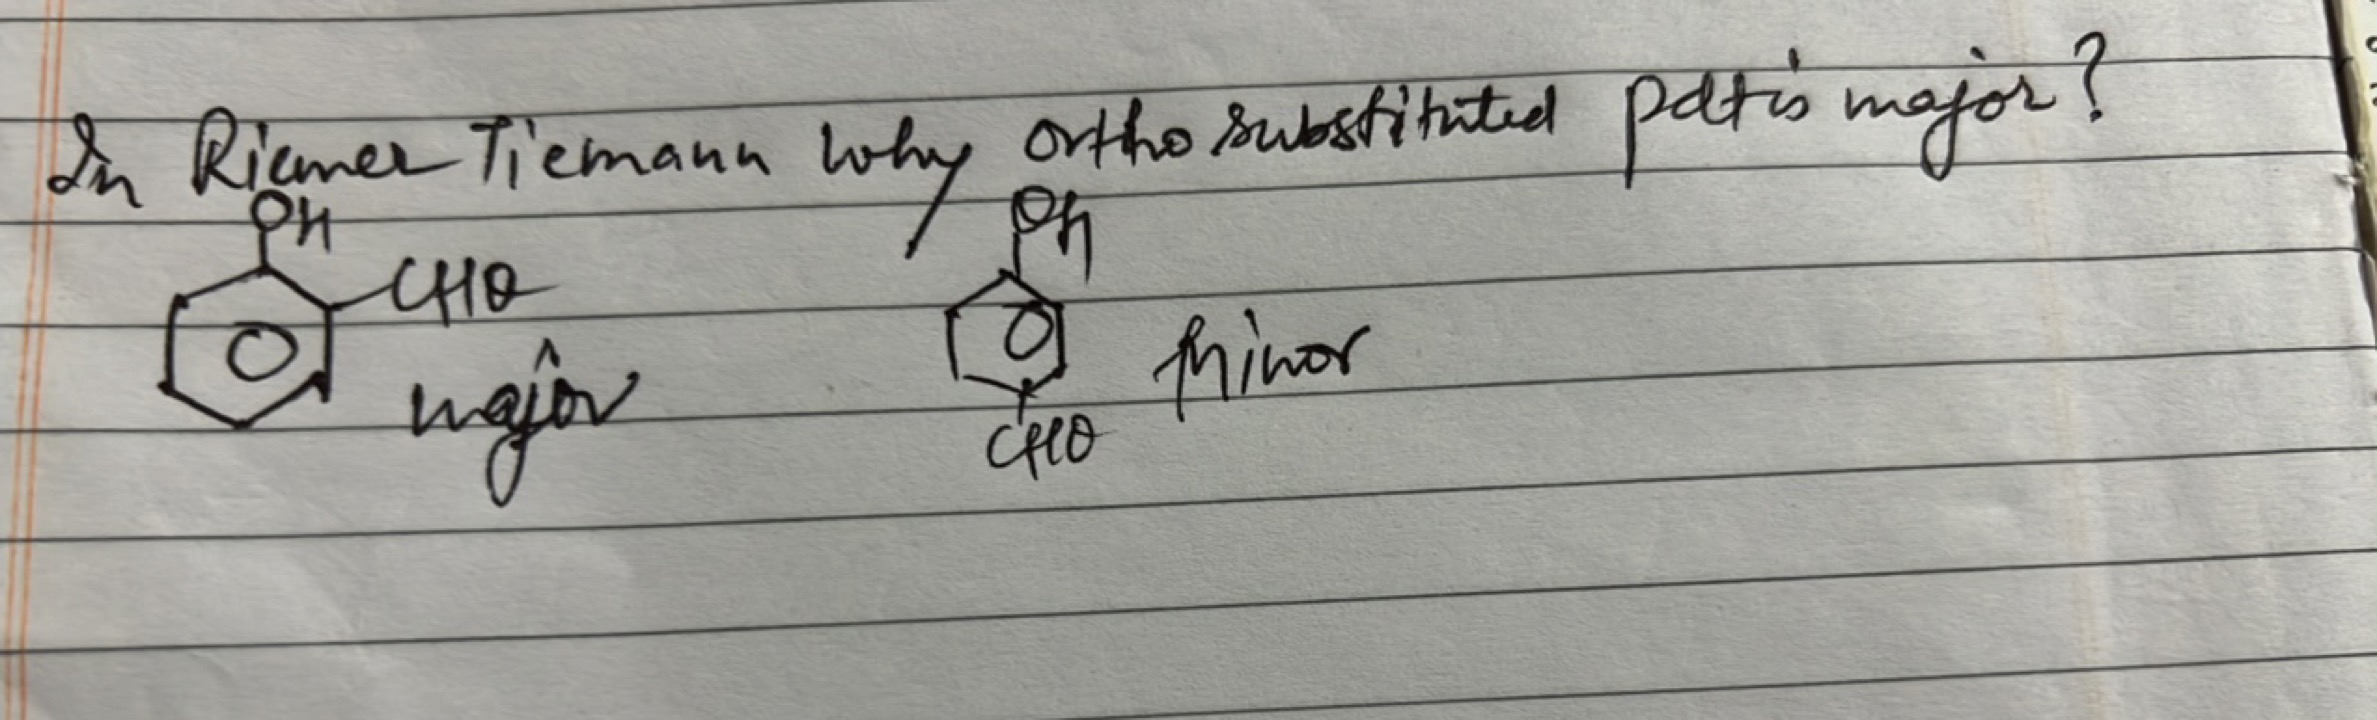 In Rianer Tiemann why ortho substituted patis major?
CN=Cc1c(O)cccc1C=